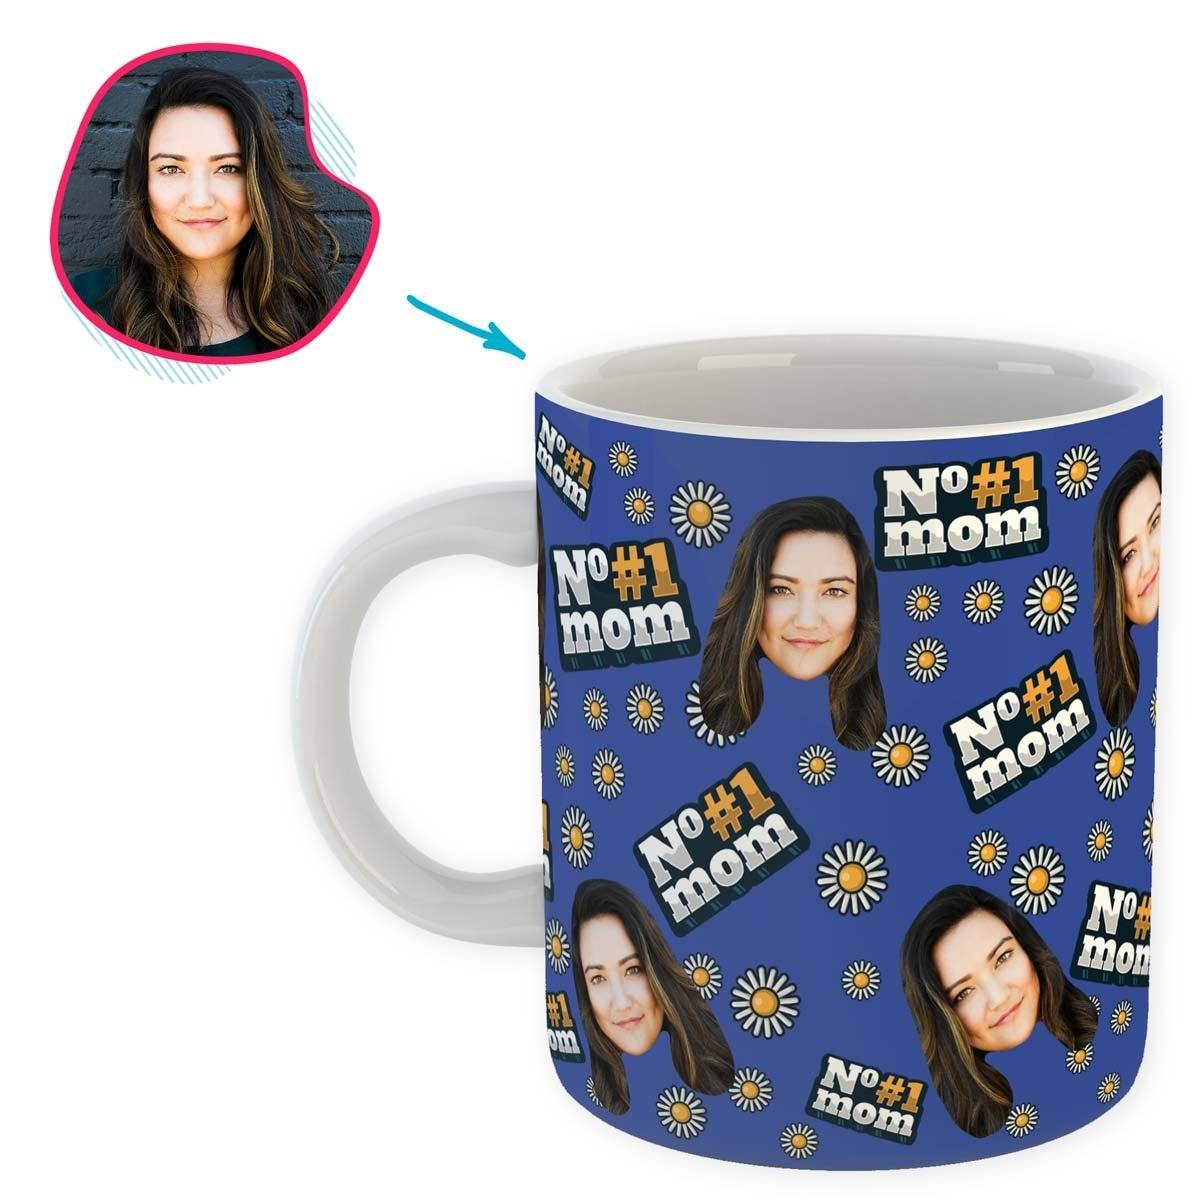 darkblue #1 Mom mug personalized with photo of face printed on it